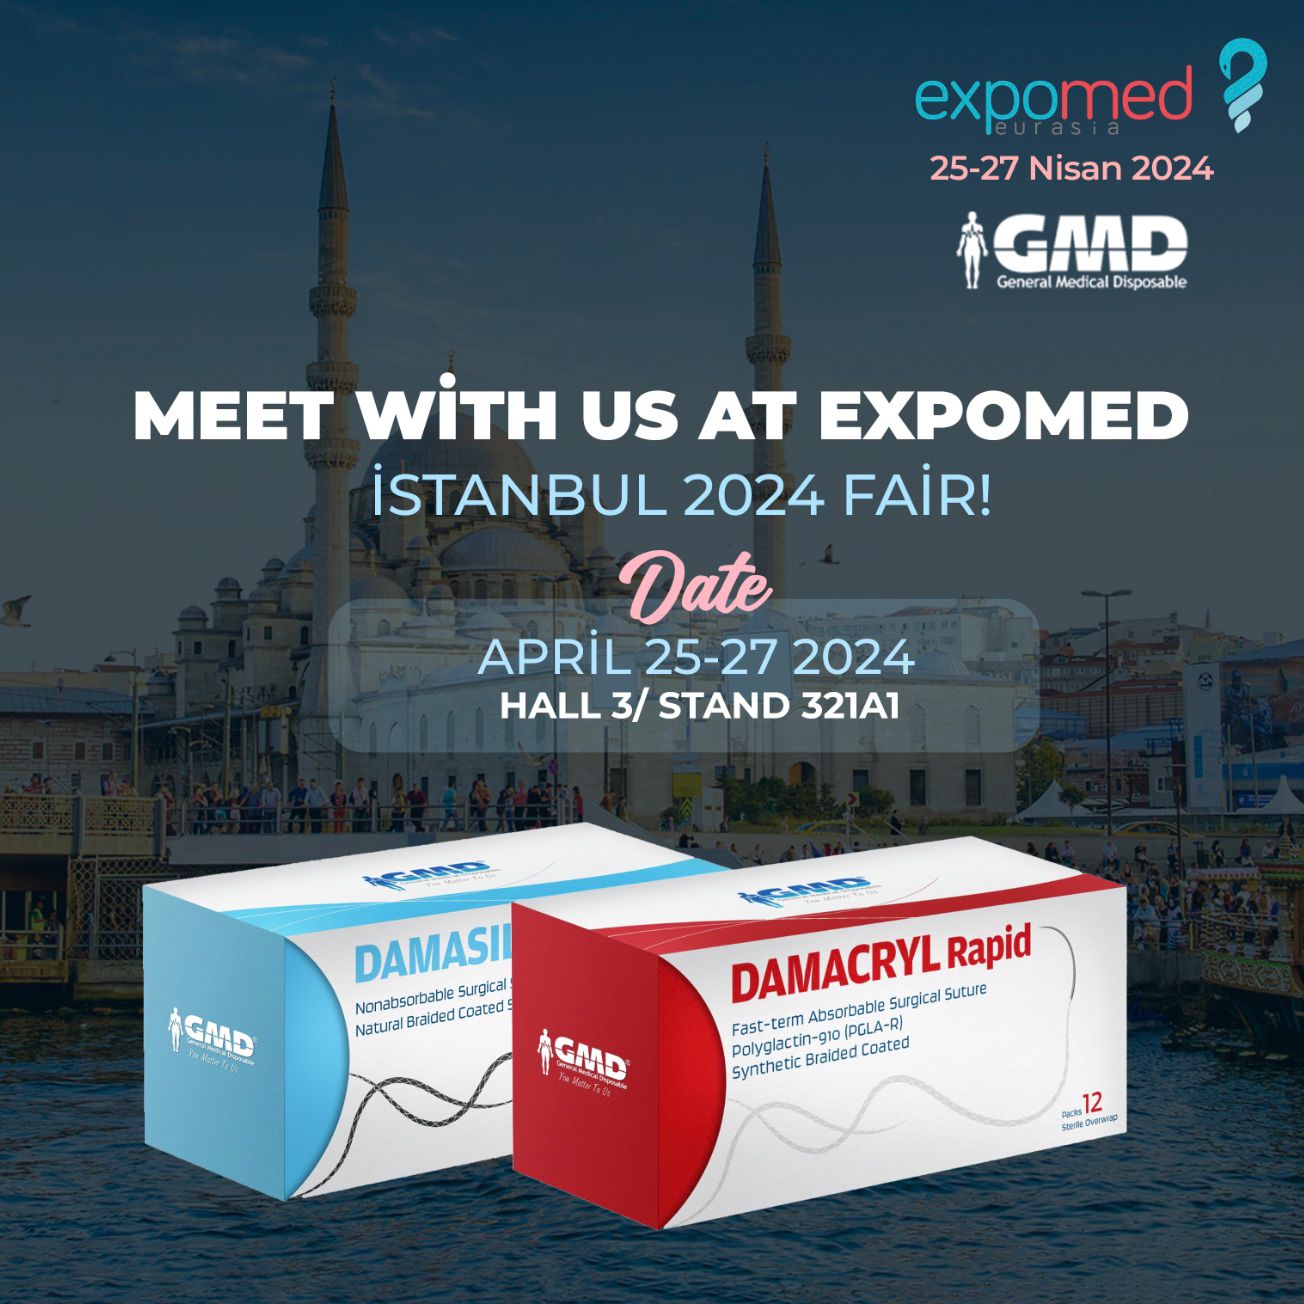 Gmd Suture expomed